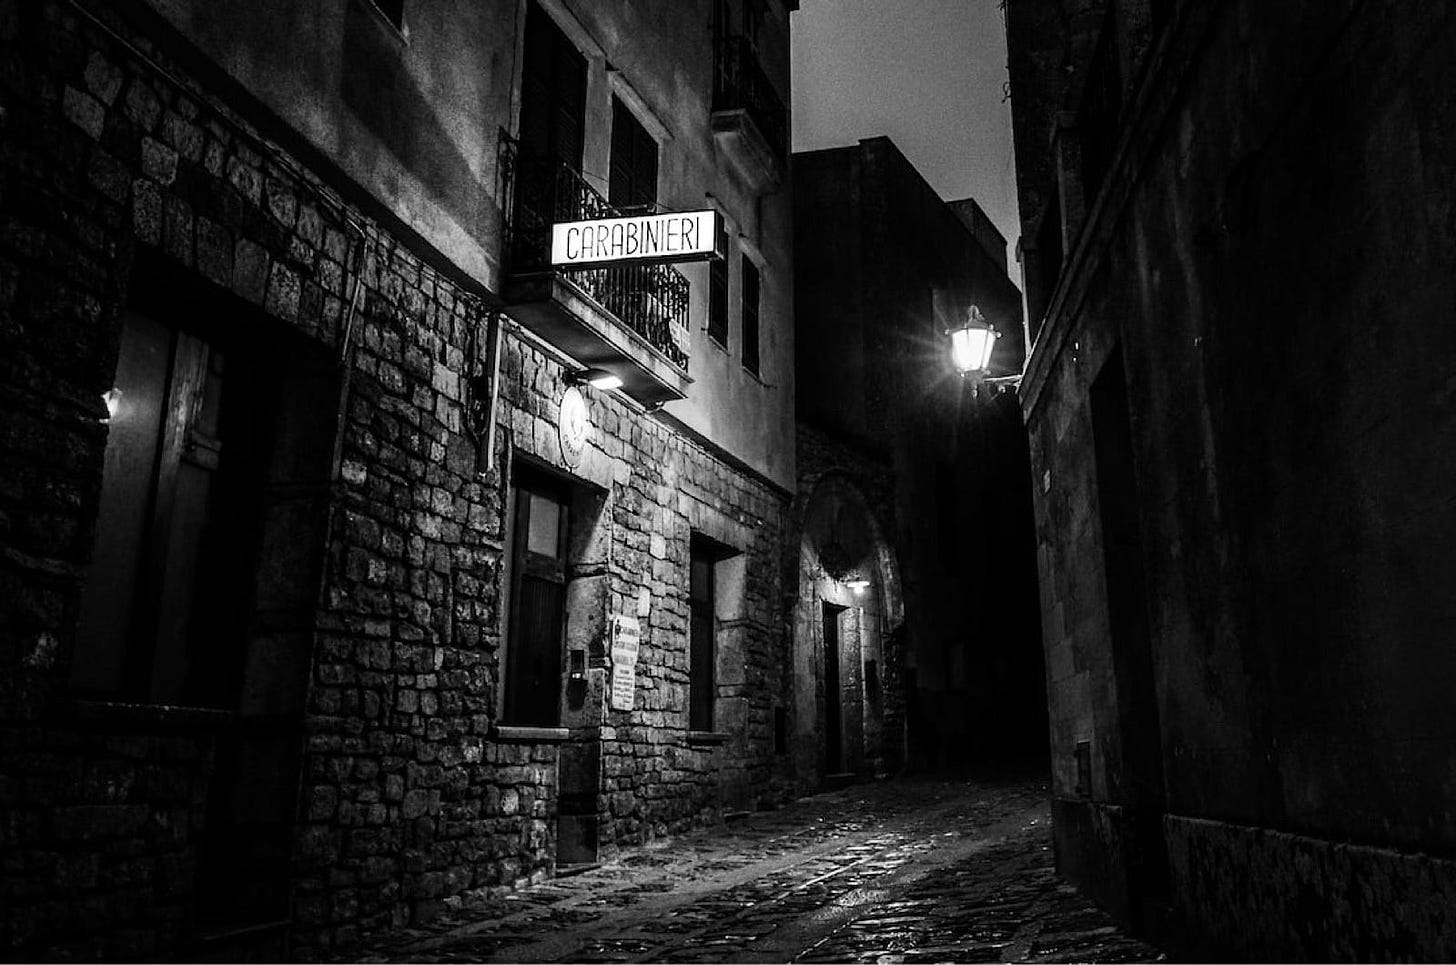 Dark alley in a city at night